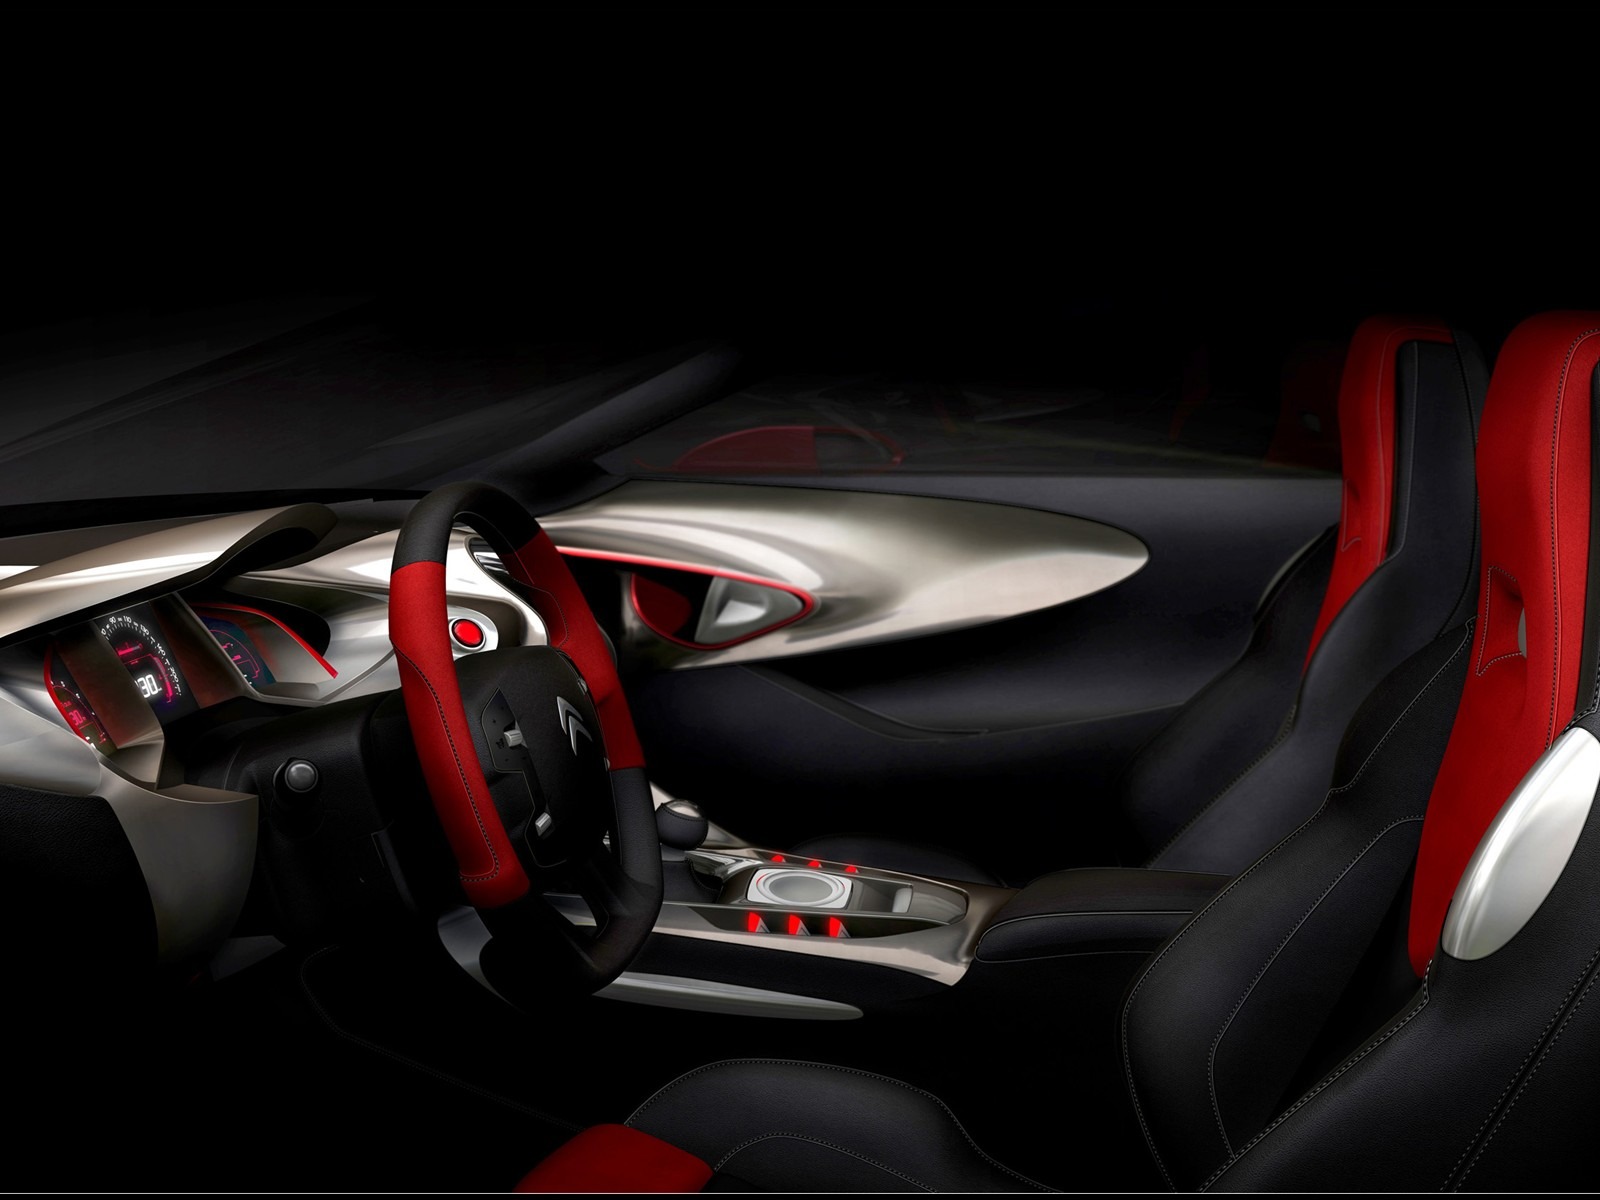 Special edition of concept cars wallpaper (5) #2 - 1600x1200